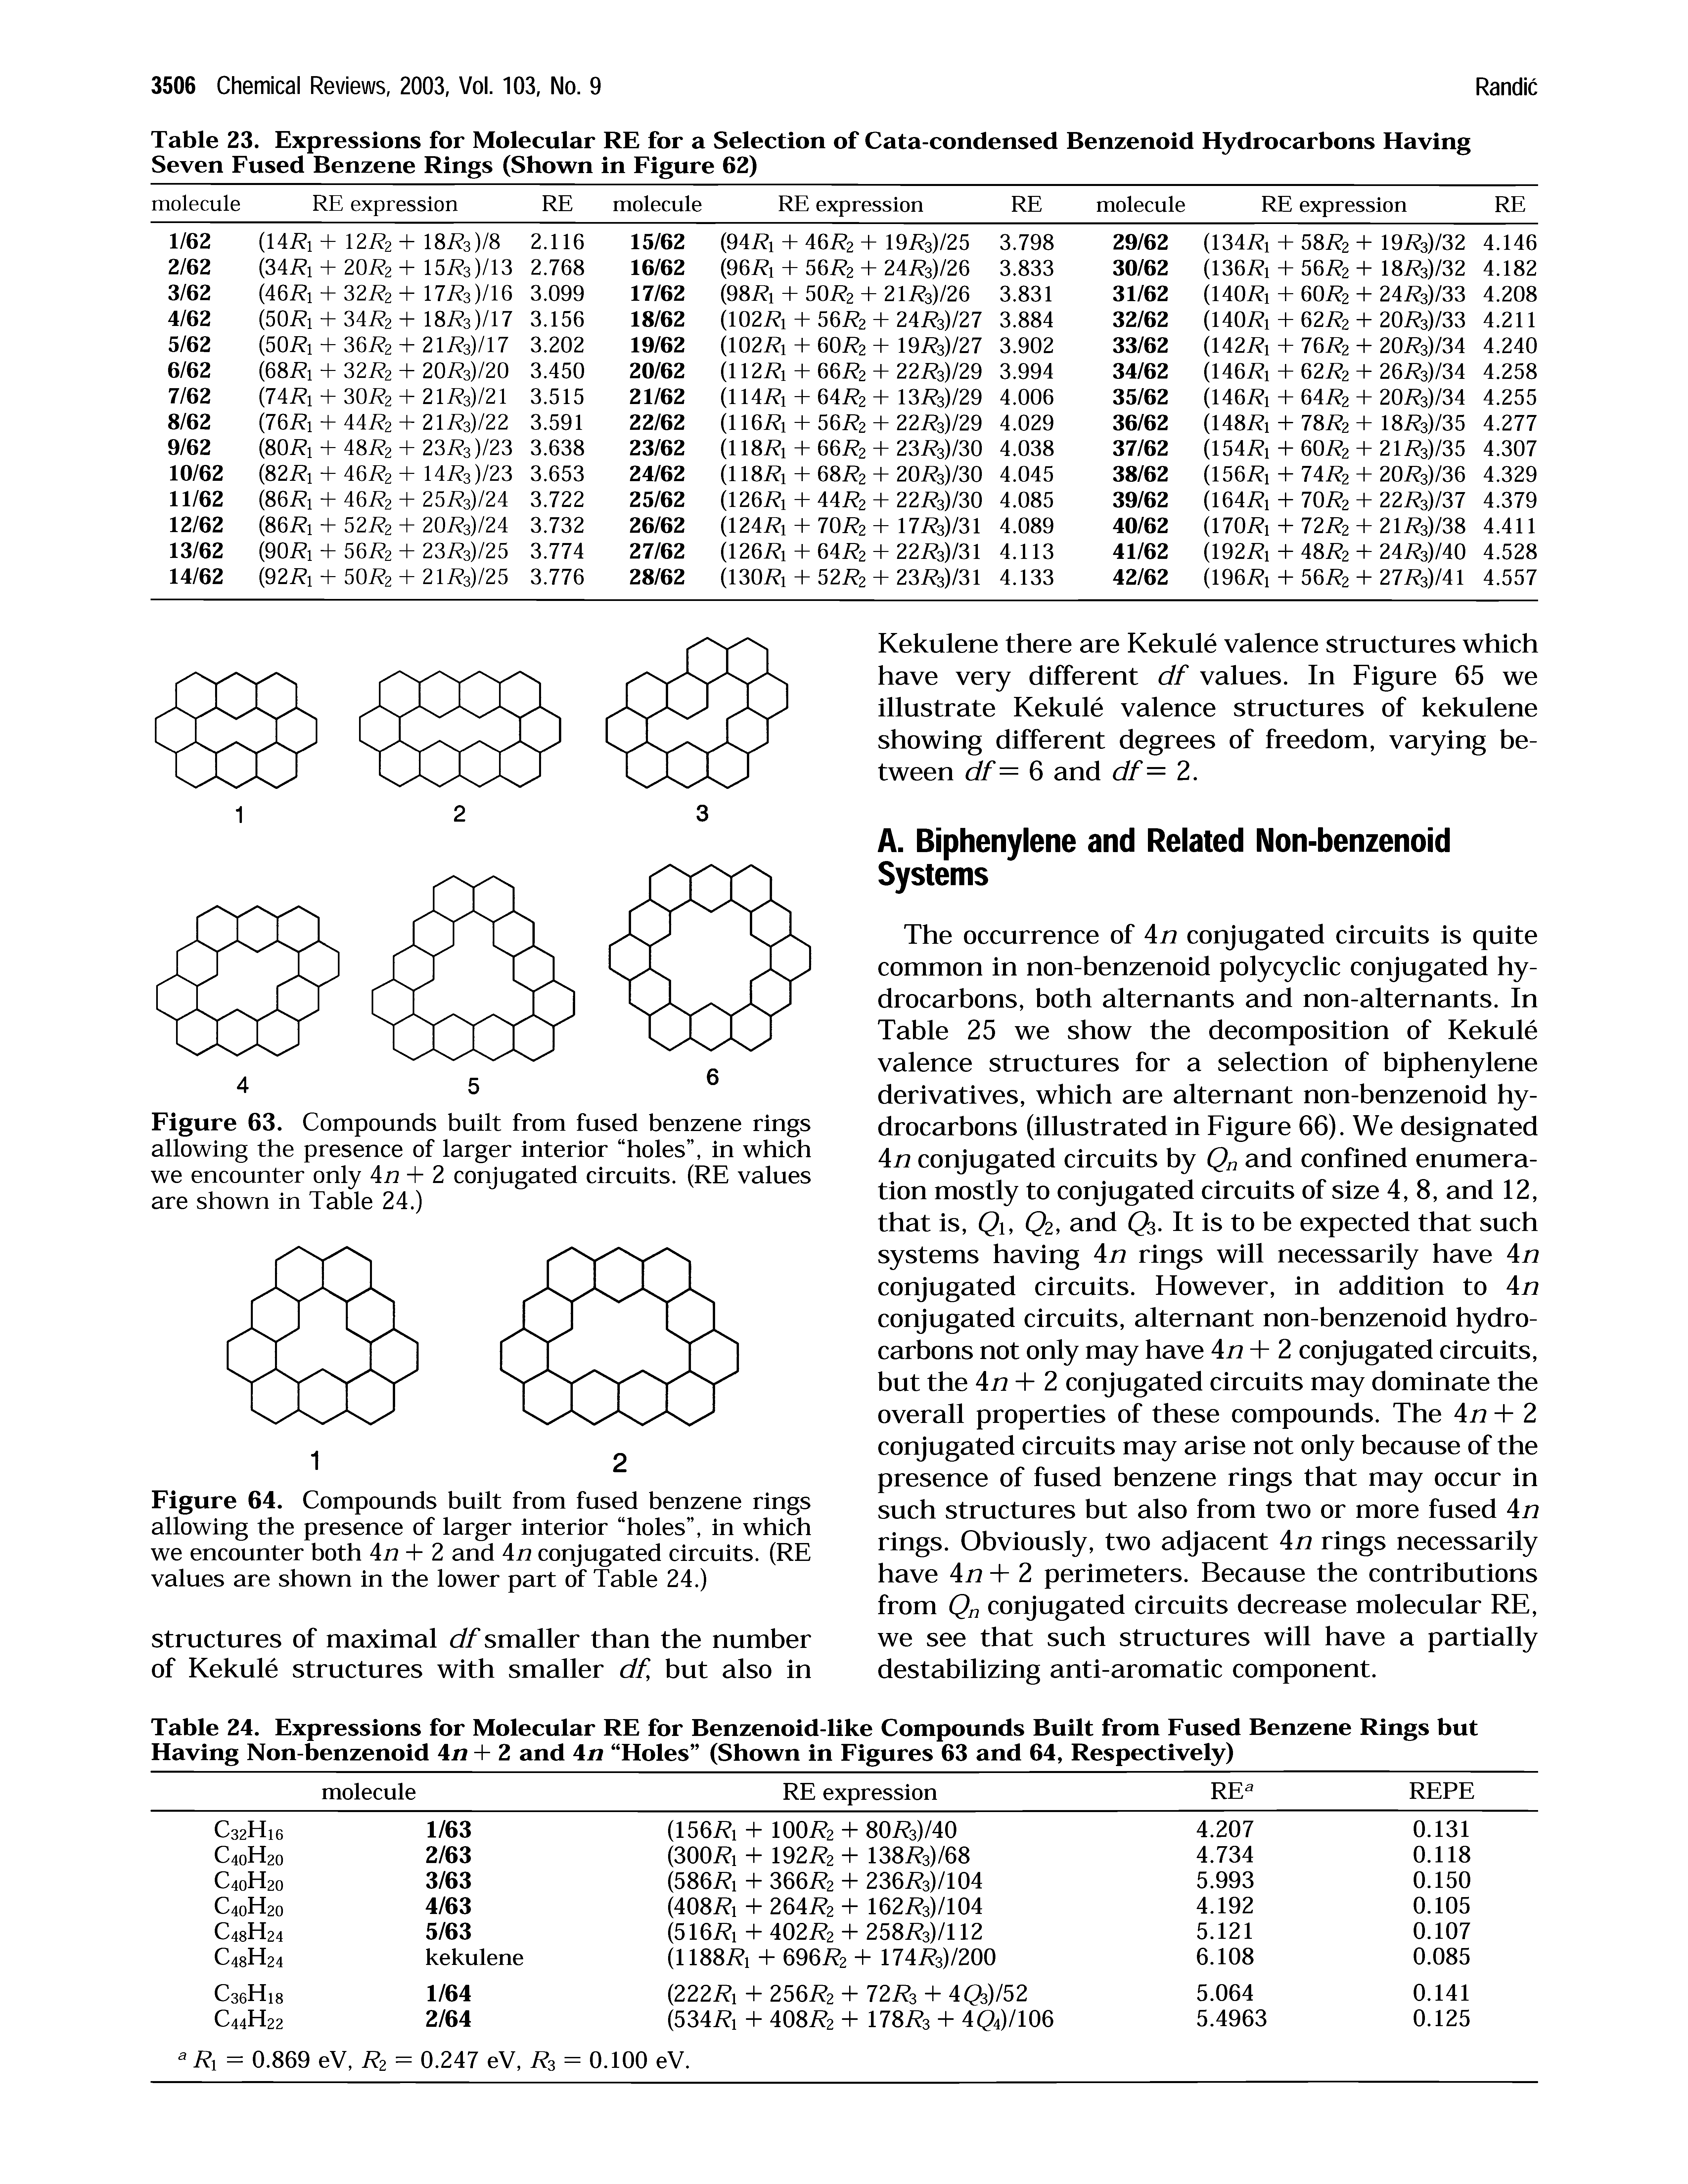 Table 23. Expressions for Molecular RE for a Selection of Cata-condensed Benzenoid Hydrocarbons Having Seven Fused Benzene Rings (Shown in Figure 62)...